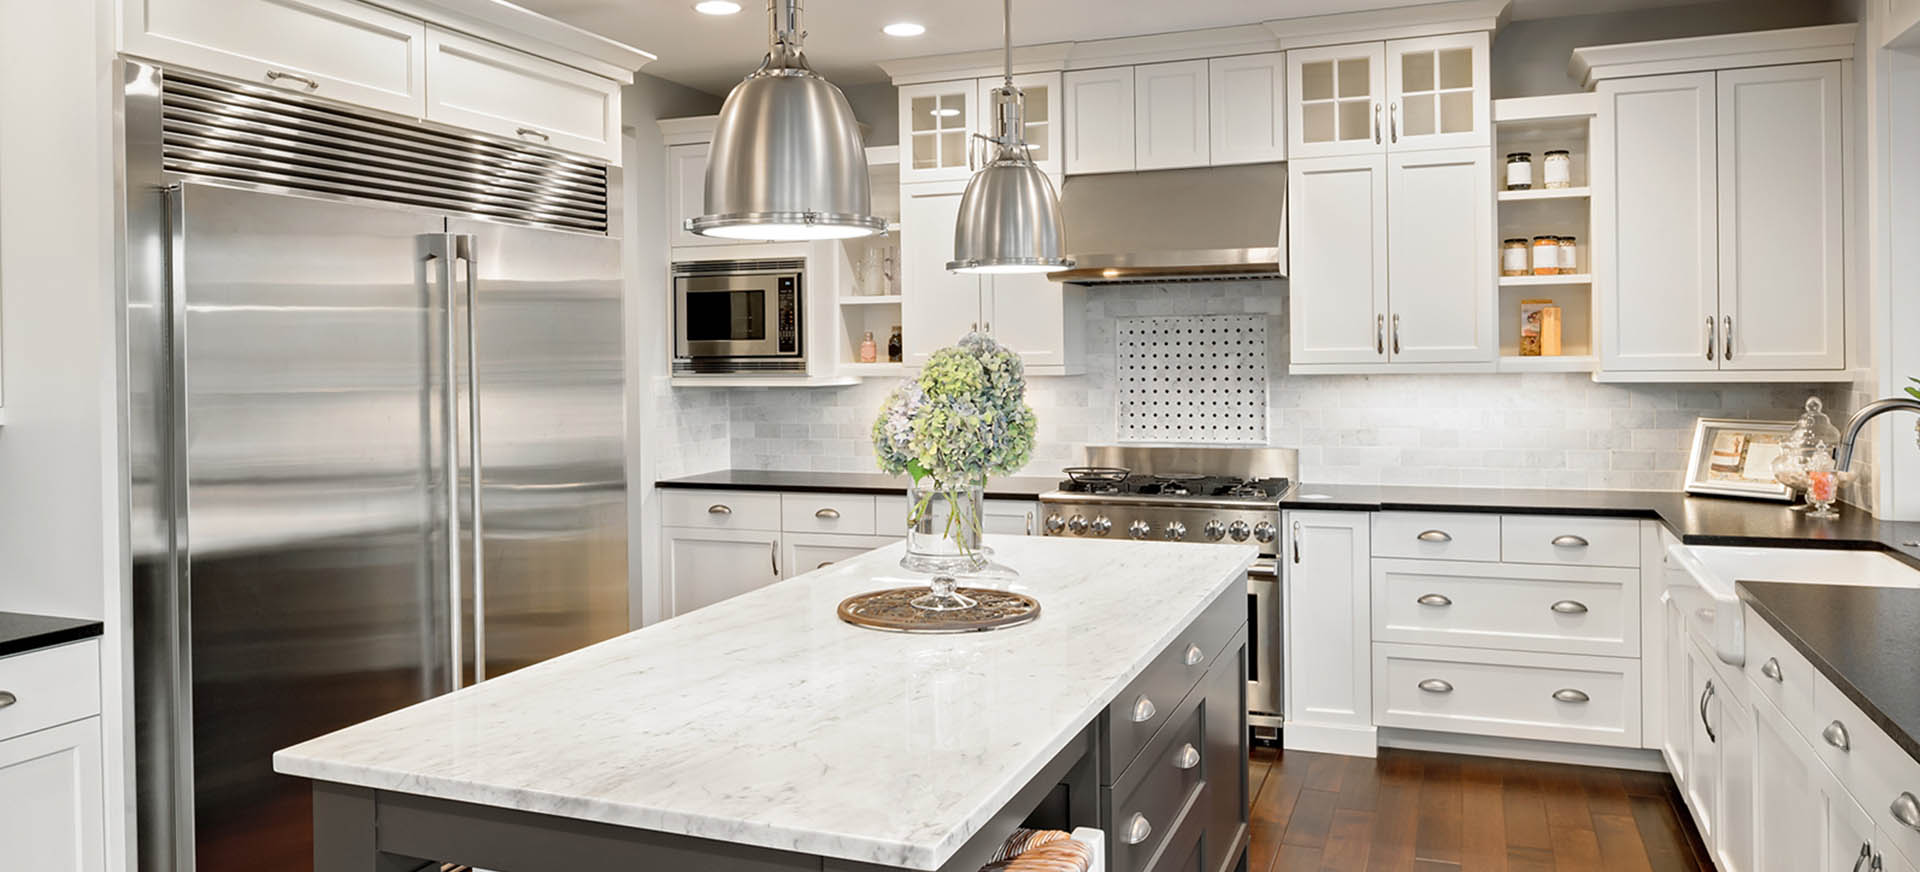 Kitchen Cabinet Accessories To Consider When Remodeling — Degnan